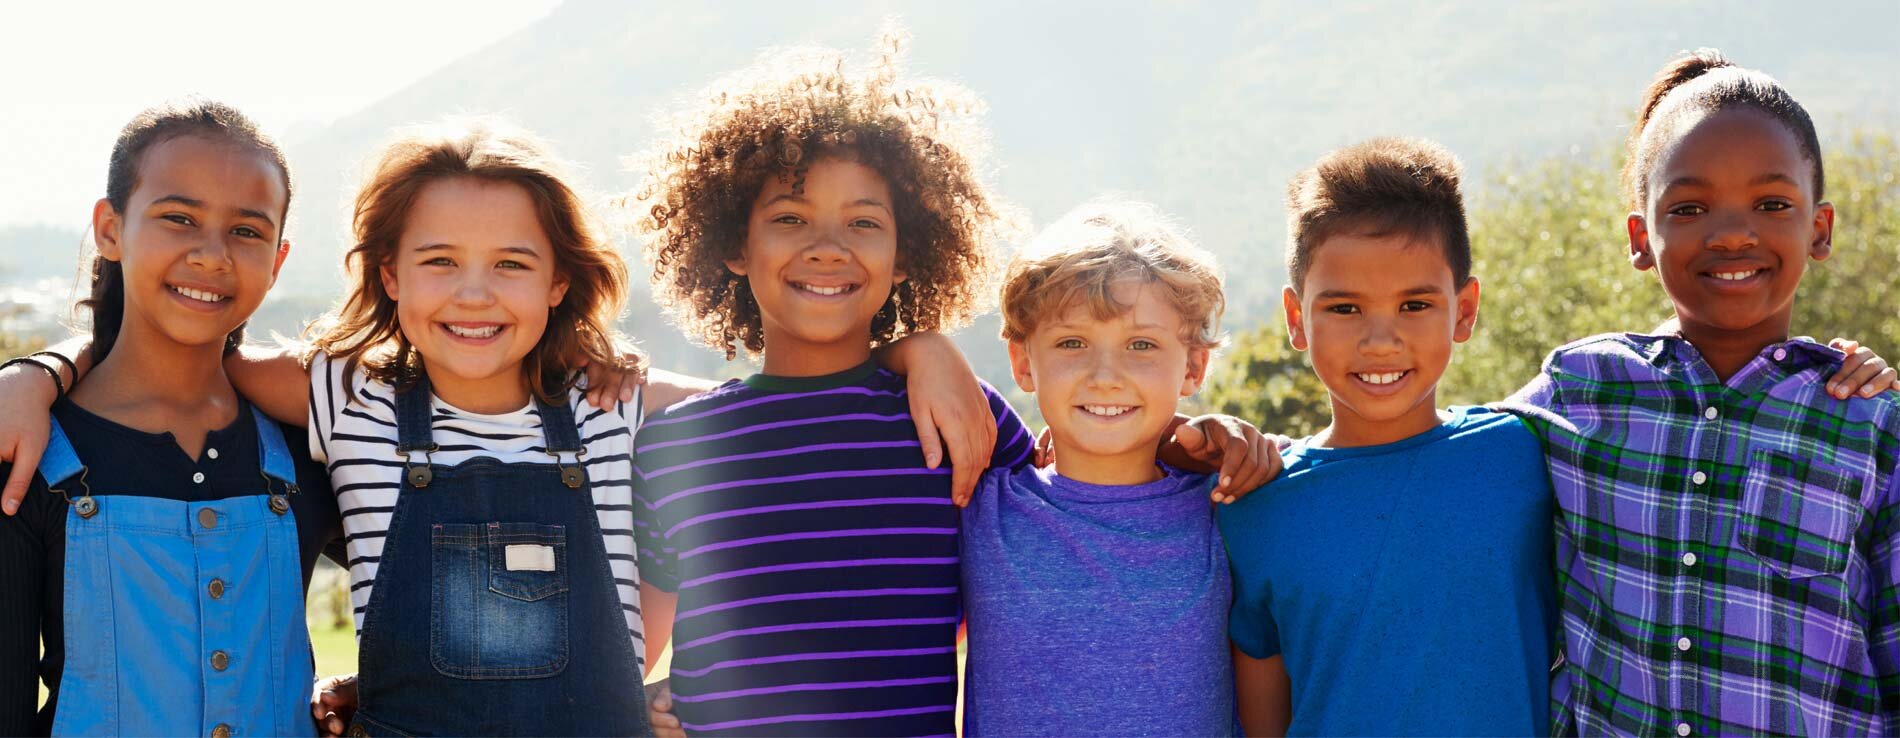 Group of Children outdoors smiling